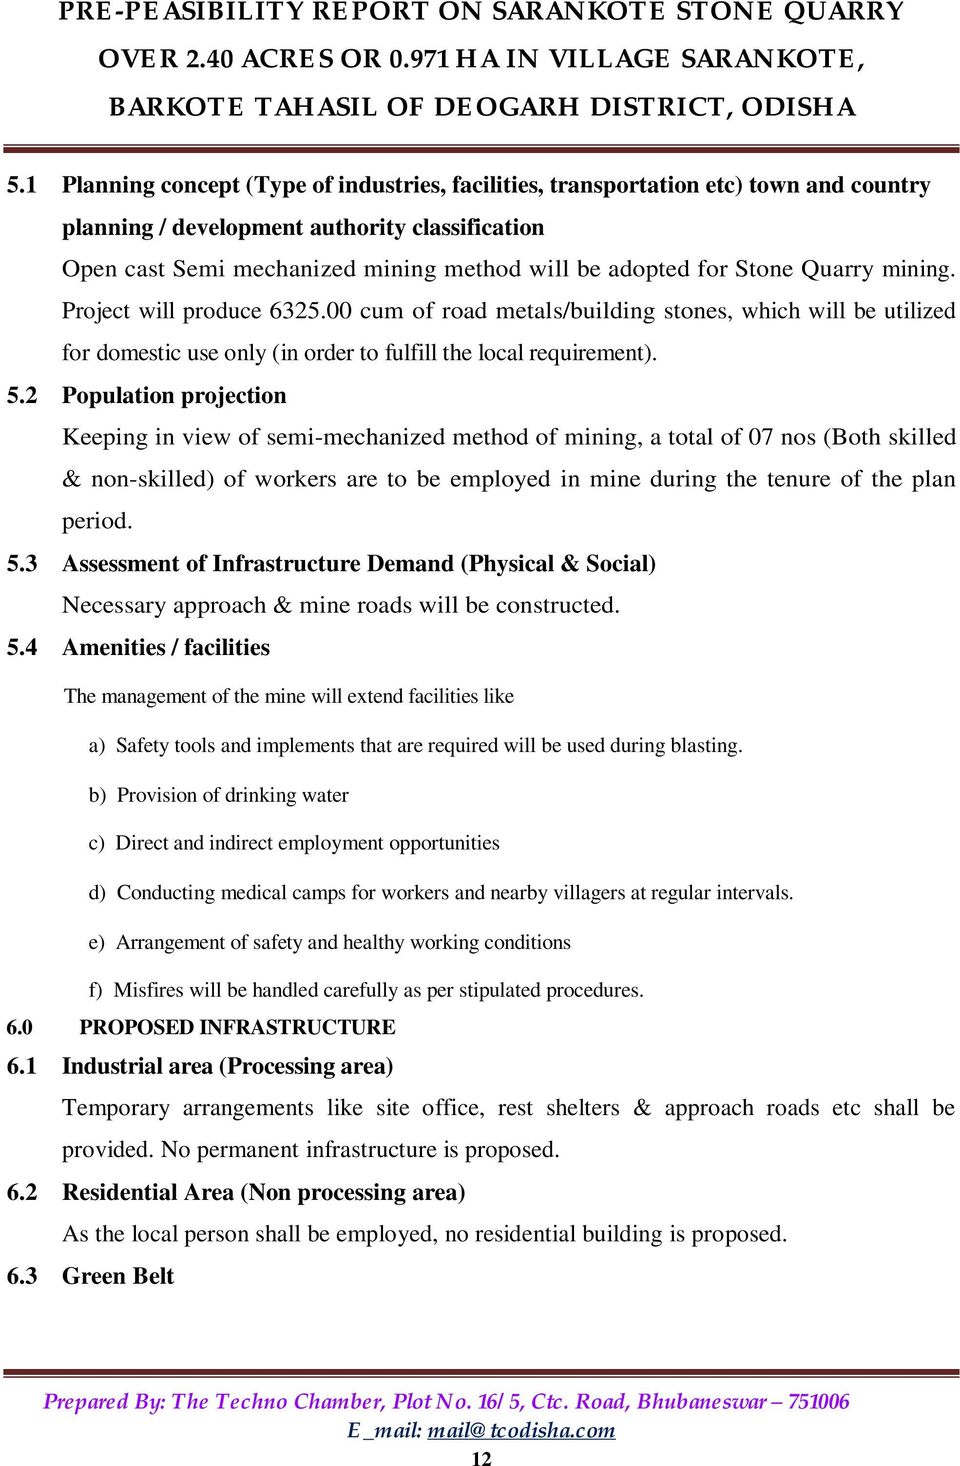 2 Population projection Keeping in view of semi-mechanized method of mining, a total of 07 nos (Both skilled & non-skilled) of workers are to be employed in mine during the tenure of the plan period.